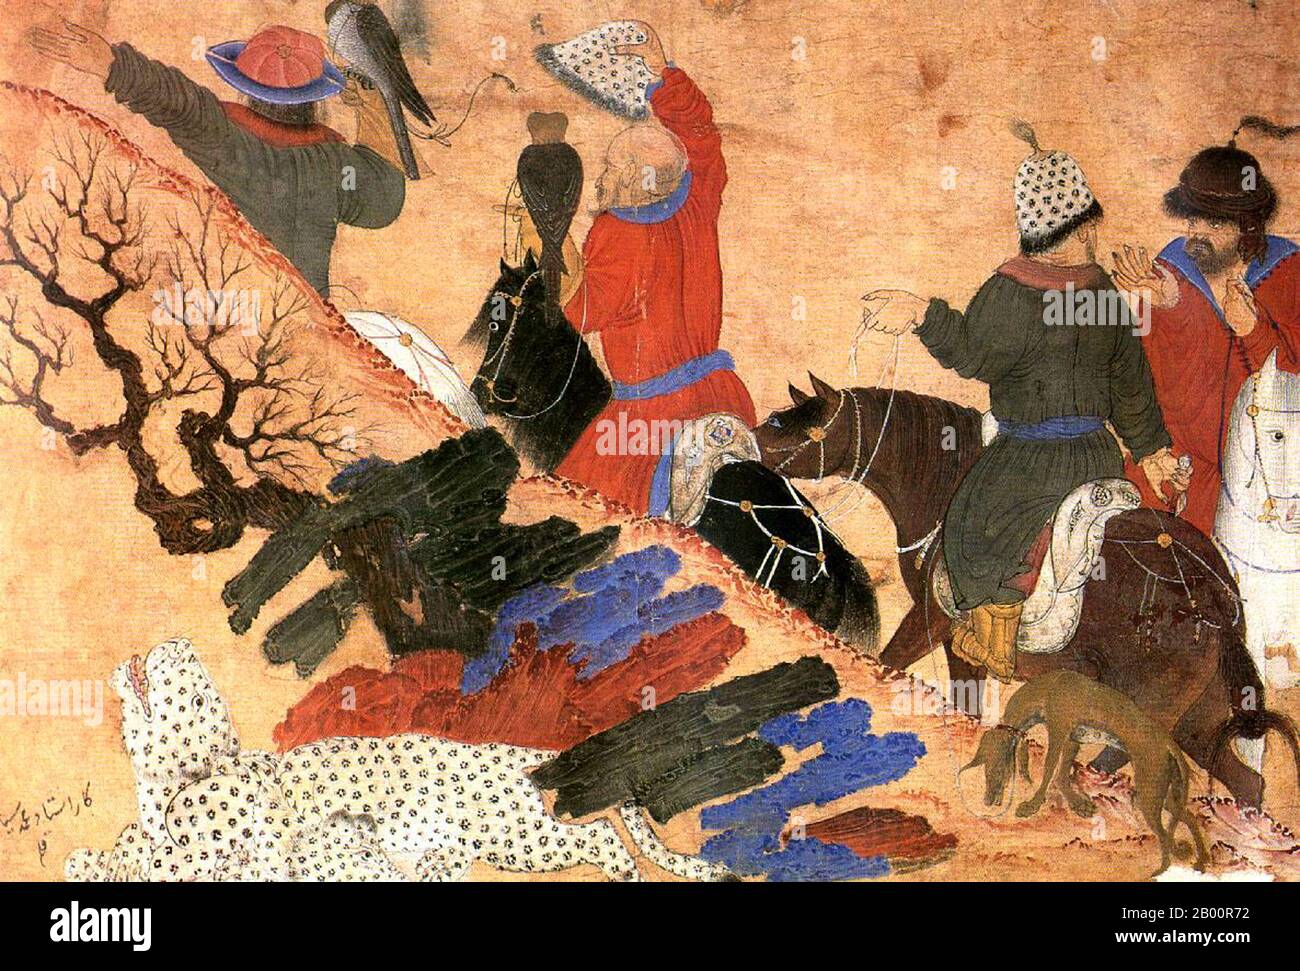 Central Asia: Siyah Kalem School, 15th century: A hunting party with dogs and falcons. a leopard looks on.  Siyah Kalem or 'Black Pen' is the name given to the 15th century school of painting attributed to Mehmed Siyah Kalem. Nothing is known of his life, but his work indicates that he was of Central Asian Turkic origin, and thoroughly familiar with camp and military life. The paintings appear in the 'Conqueror’s Albums', so named because two portraits of Sultan Mehmed II the Conqueror are present in one of them. Stock Photo